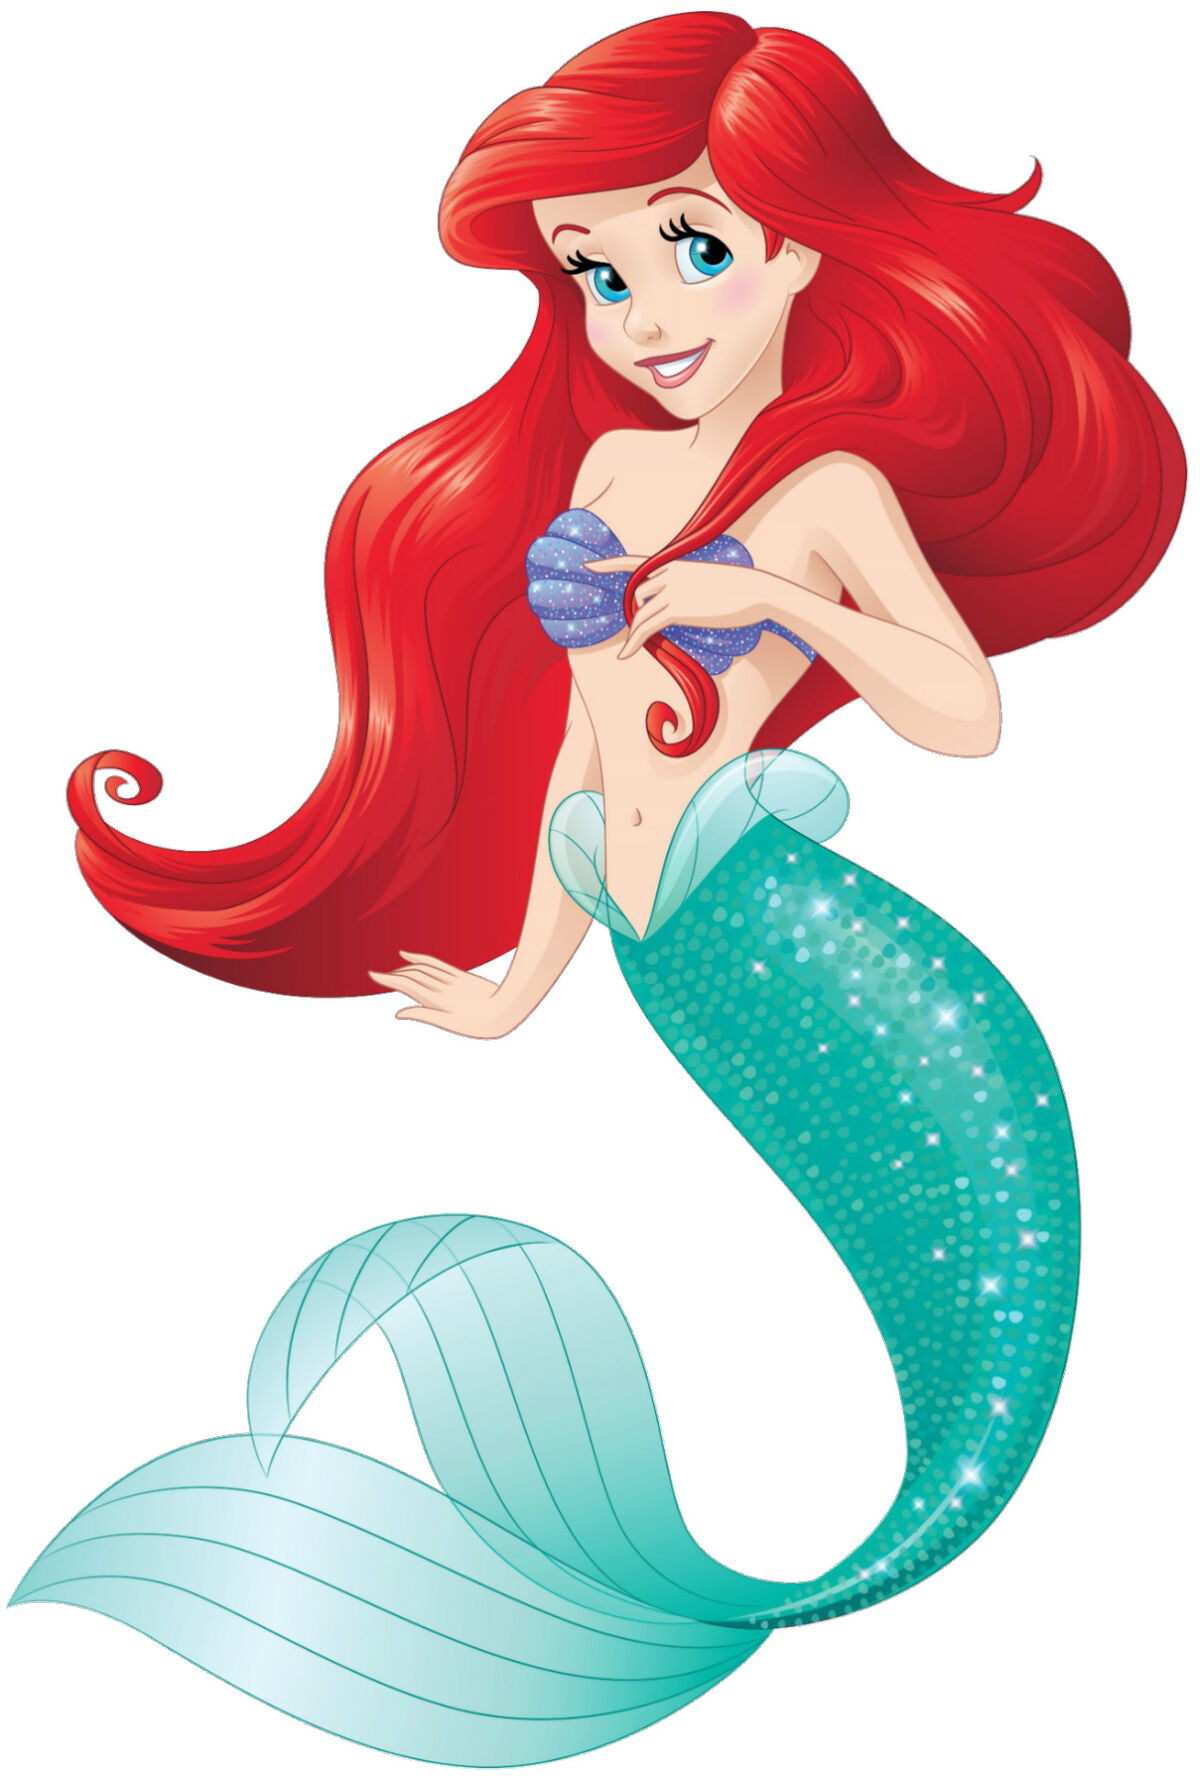 https://static.wikia.nocookie.net/disney-princess-and-girls/images/5/52/Ariel.jpg/revision/latest/scale-to-width-down/1200?cb=20190221121936